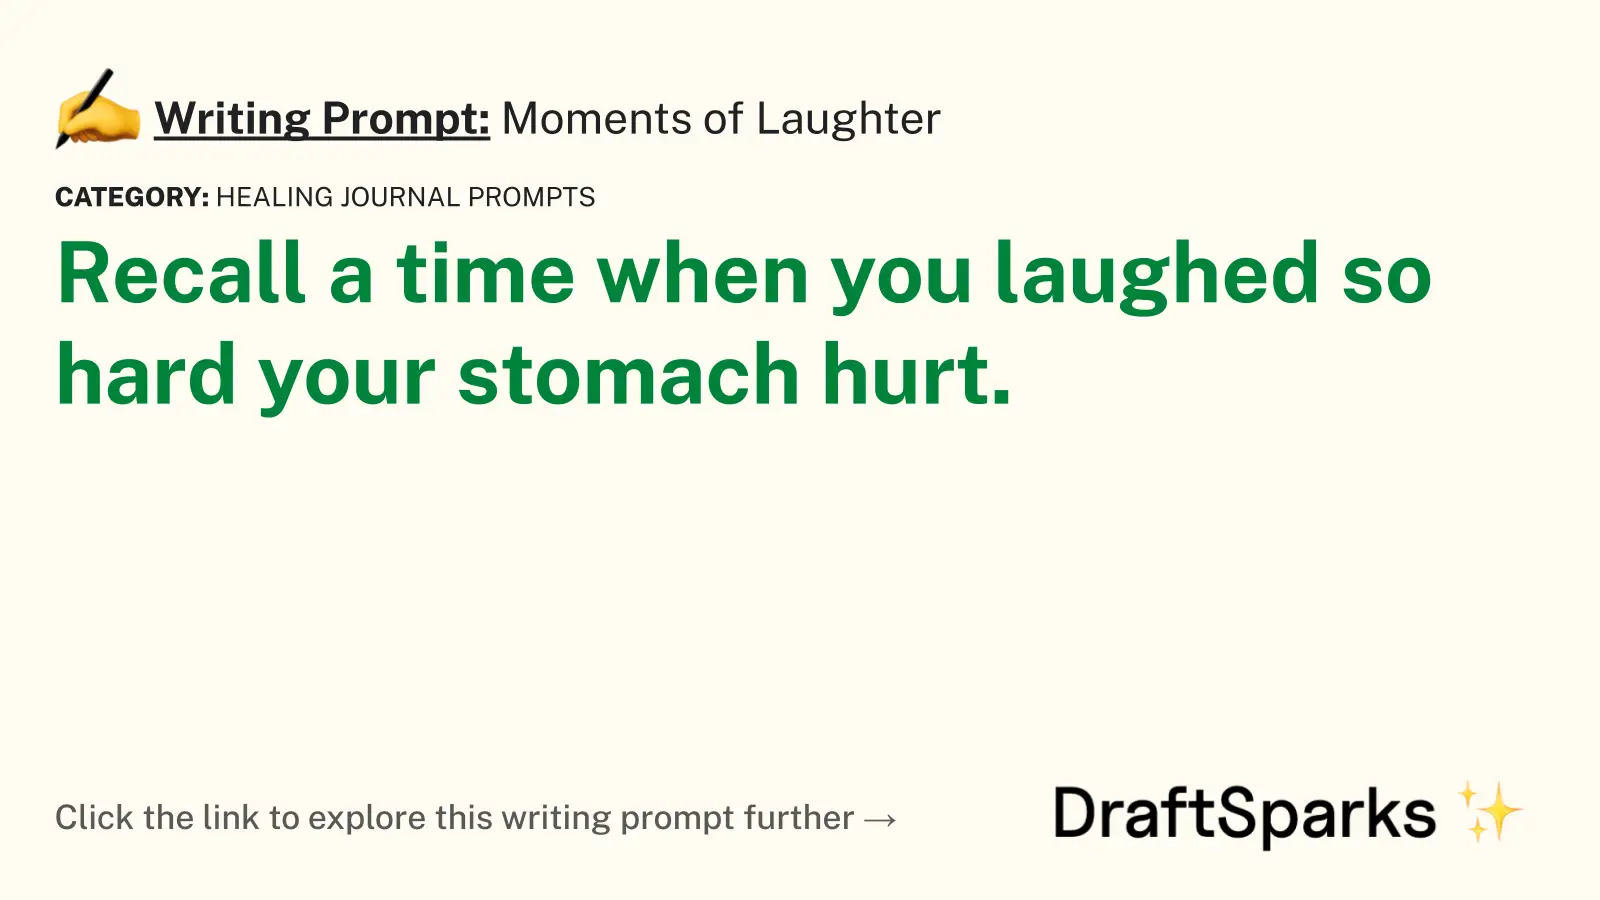 Moments of Laughter